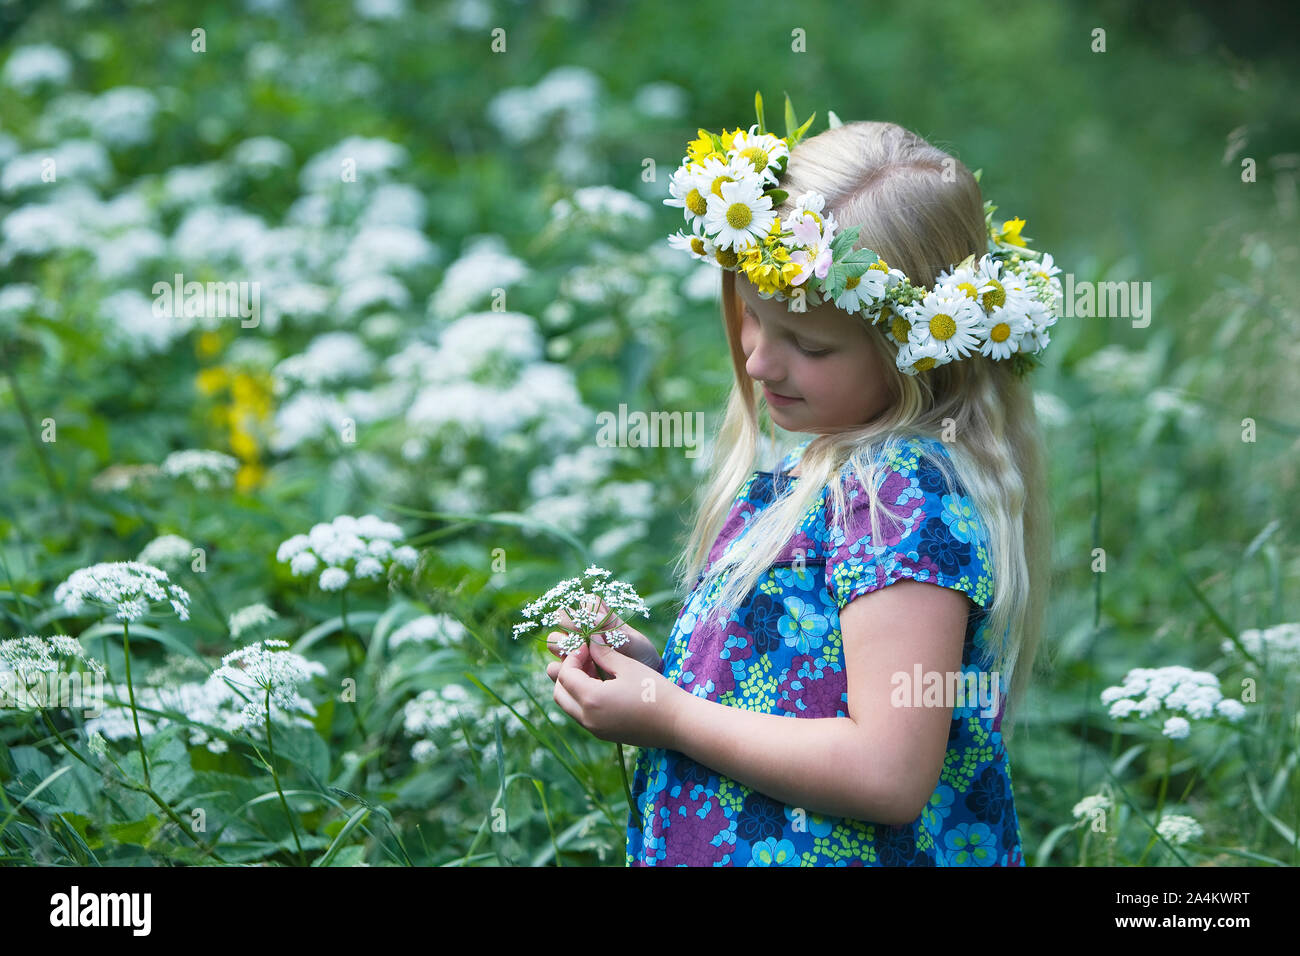 Portrait Of Young Girl Wearing Wreath Stock Photo